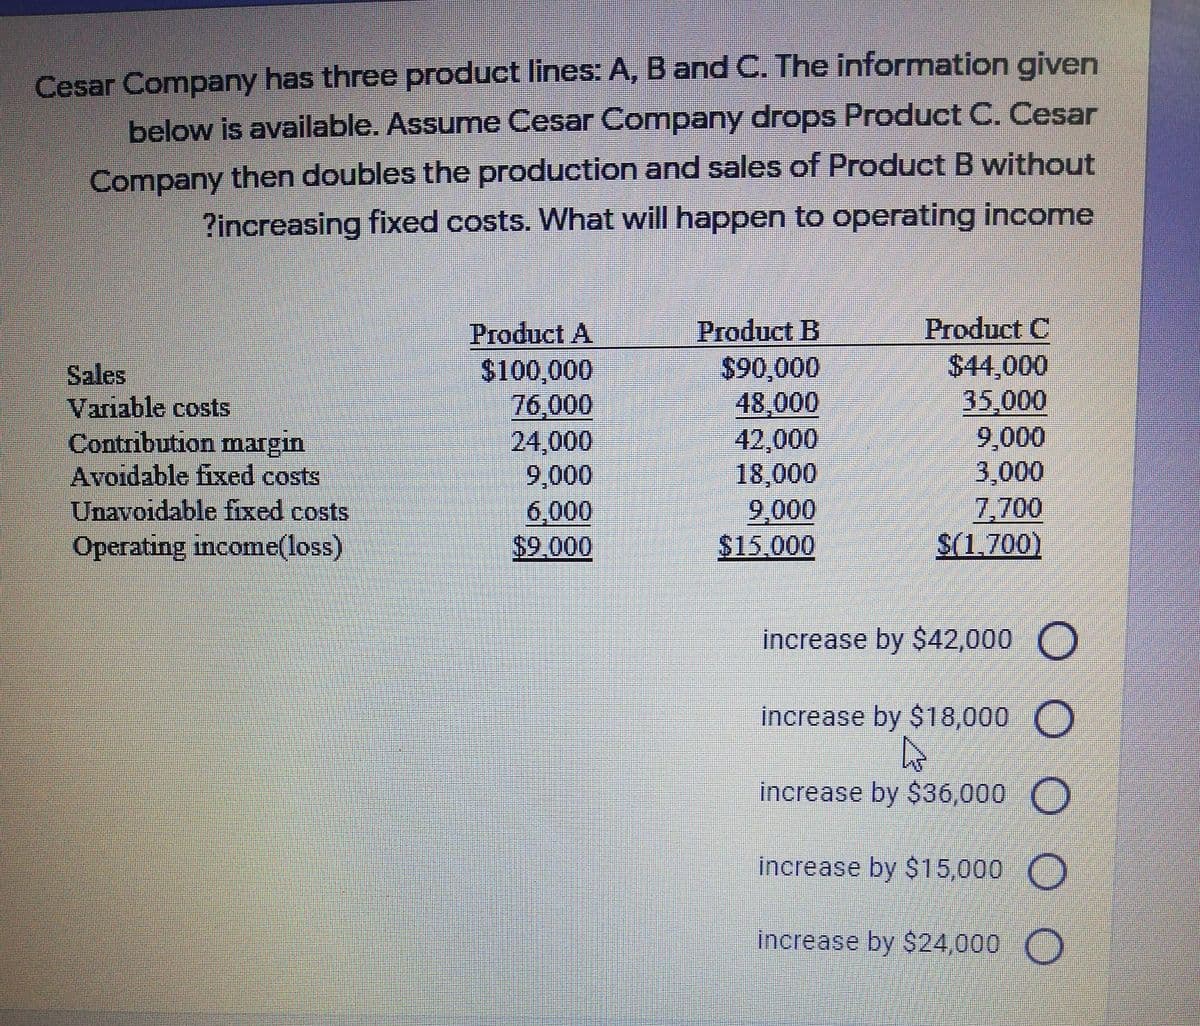 Cesar Company has three product lines: A, B and C. The information given
below is available. Assume Cesar Company drops Product C. Cesar
Company then doubles the production and sales of Product B without
?increasing fixed costs. What will happen to operating income
Product B
Product C
Sales
Variable costs
Contribution margin
Avoidable fixed costs
Unavoidable fixed costs
Operating income(loss)
Product A
$100,000
76,000
24,000
9,000
6,000
$9.000
$90,000
48,000
42,000
18,000
9,000
$15.000
$44,000
35,000
9,000
3,000
7,700
S(1,700)
increase by $42,000 O
increase by $18,000
increase by $36,000
increase by $15,000 )
increase by $24,000
